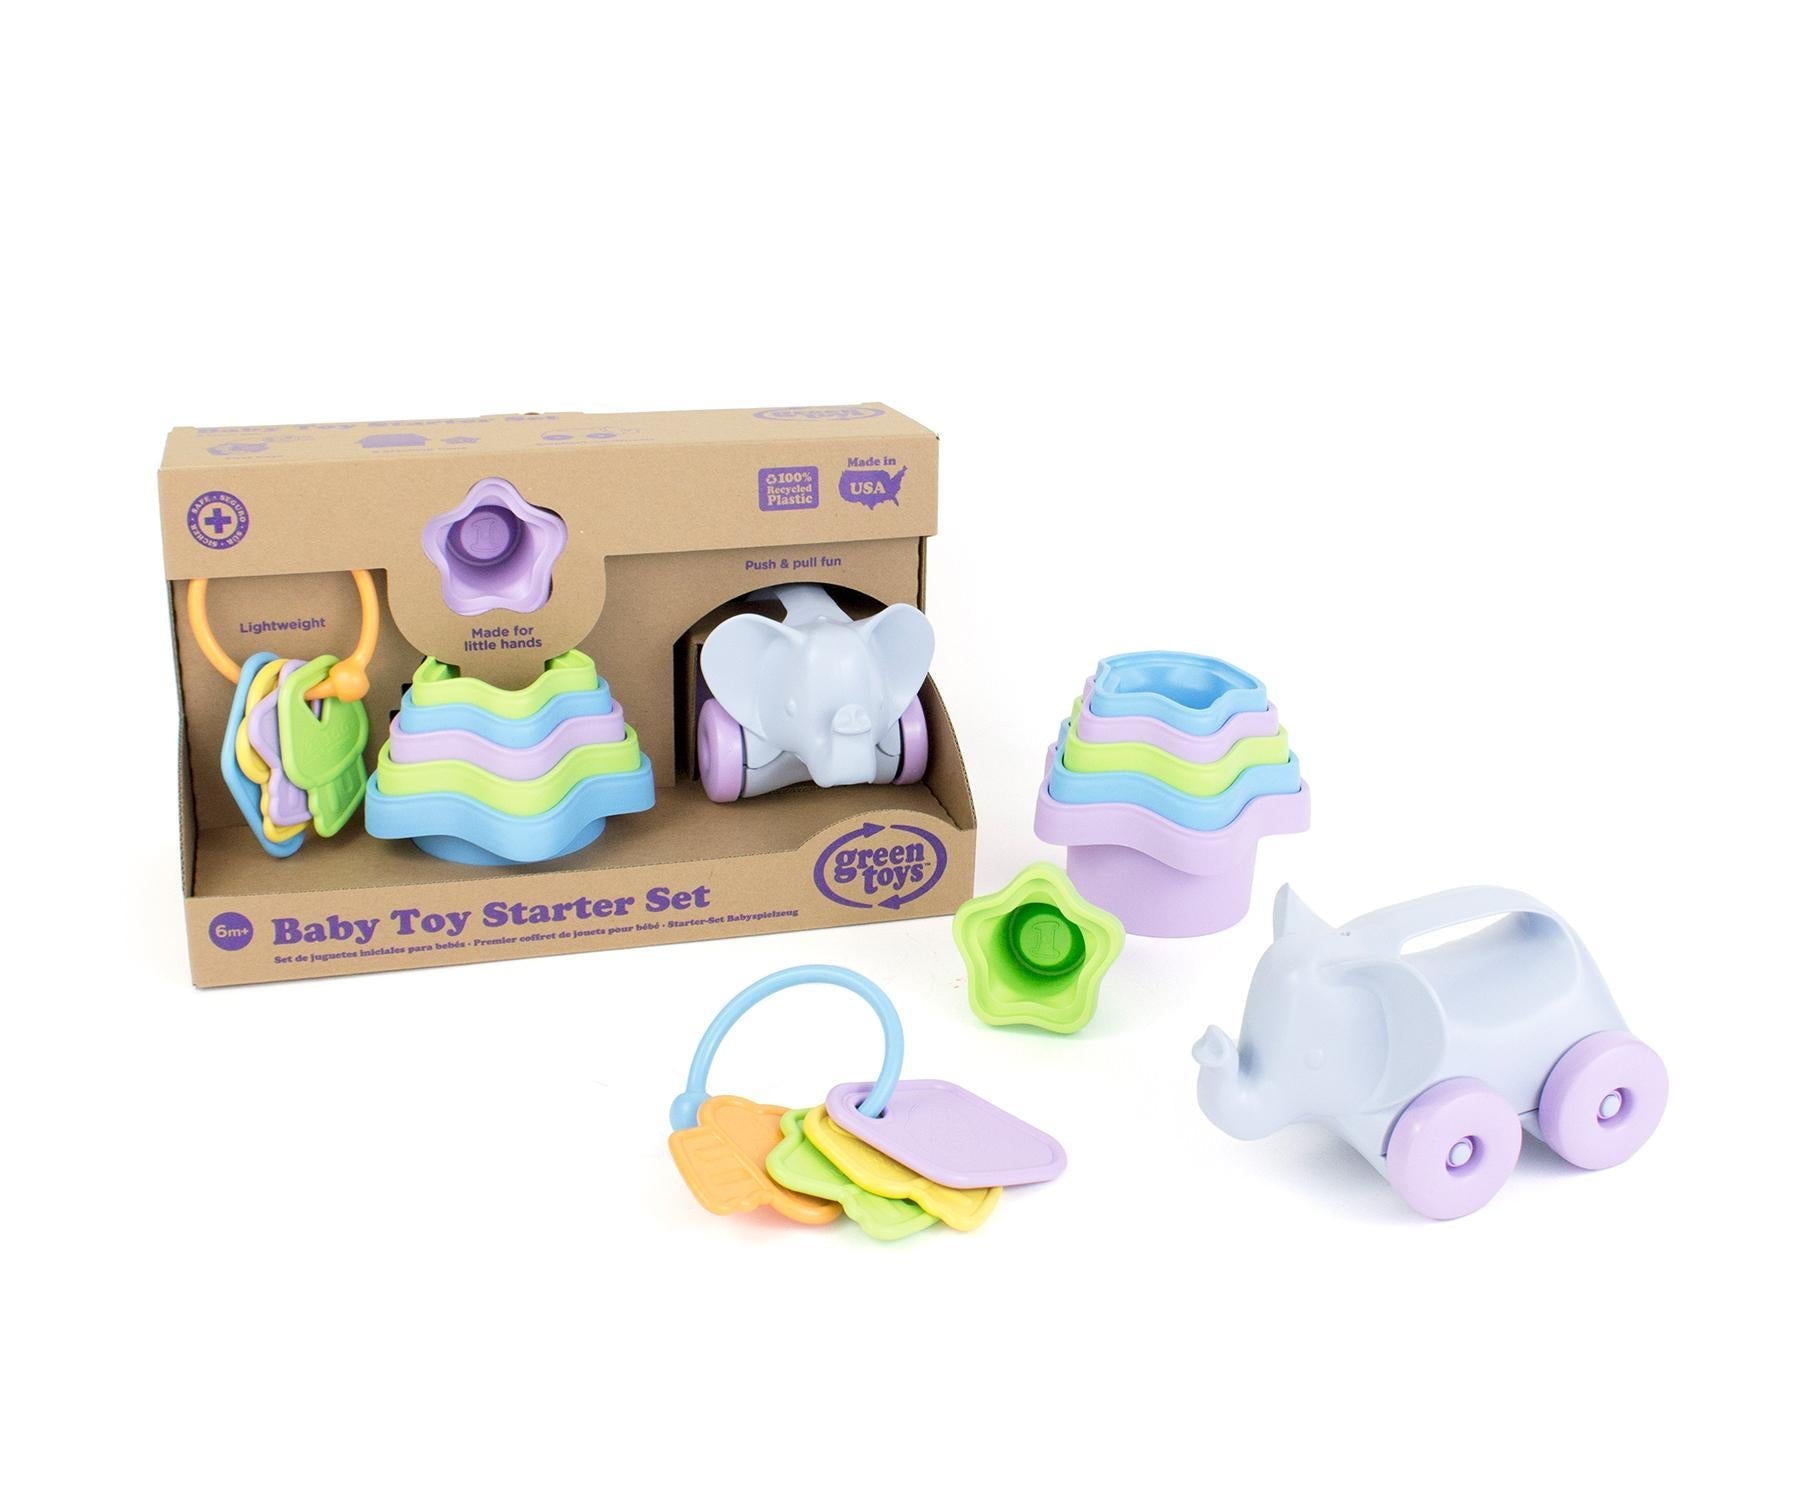 Green Toys Baby Toy Starter Set, -- ANB Baby